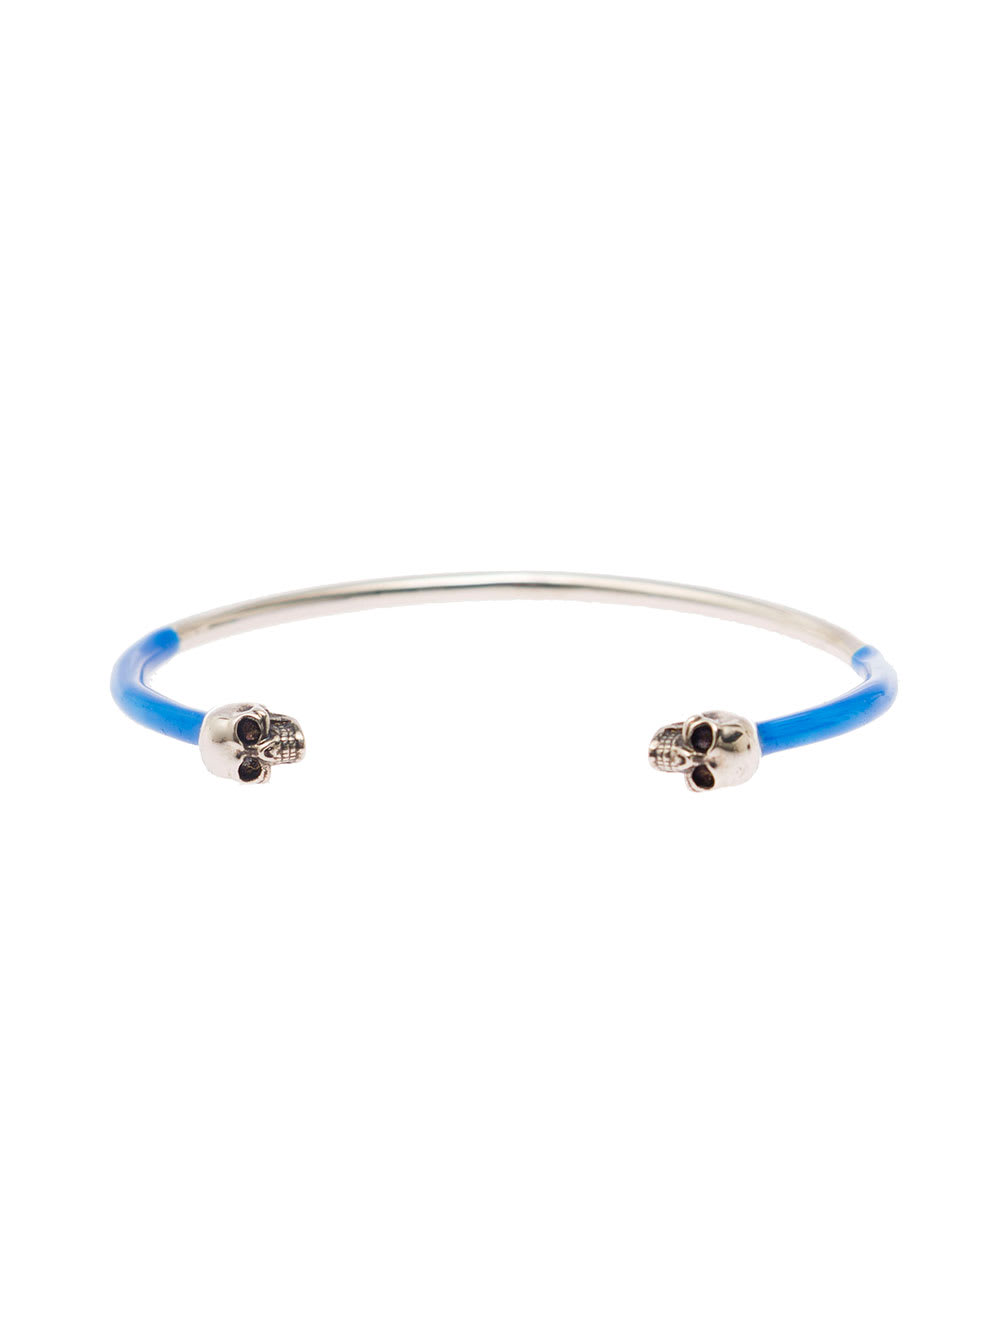 Aged Silver And Blue Bangle Bracelet With Sull Details In Brass Man